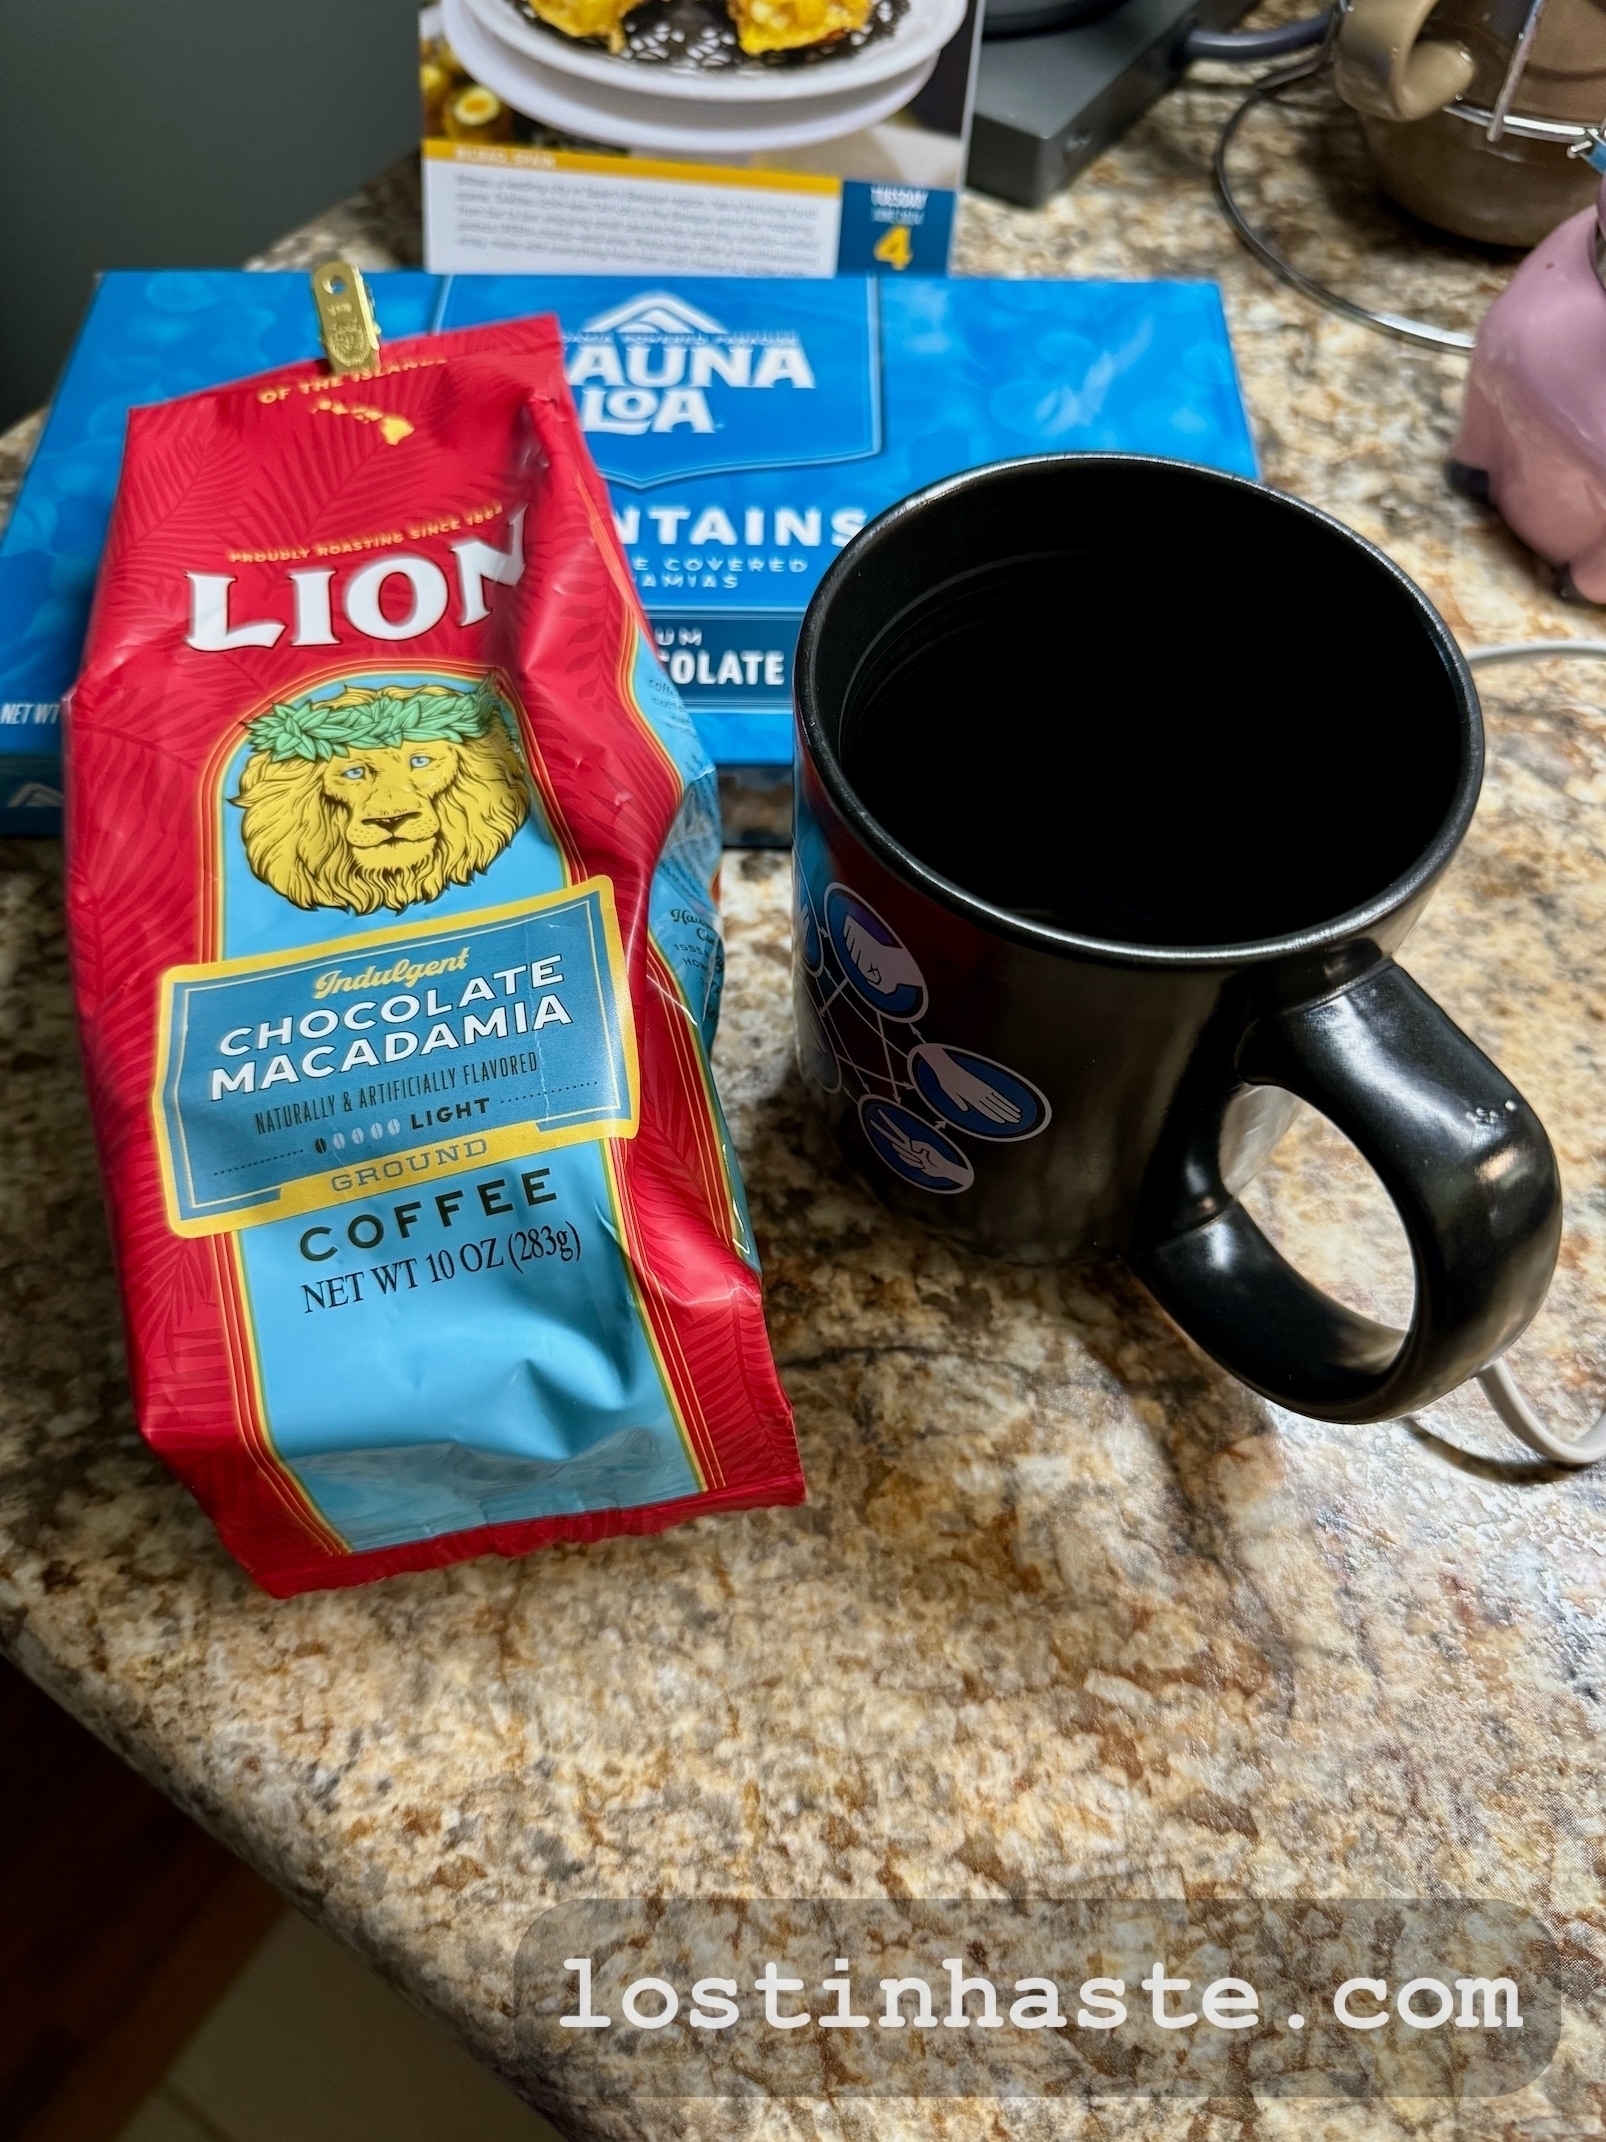 A red coffee bag labeled 'LION' rests on a countertop beside a Big Bang Theory (paper rocks lizard scissors Spock) themed mug and a blue box reading 'MAUNA LOA', all atop a kitchen counter. The URL 'lostinhaste.com' is overlaid at the bottom.